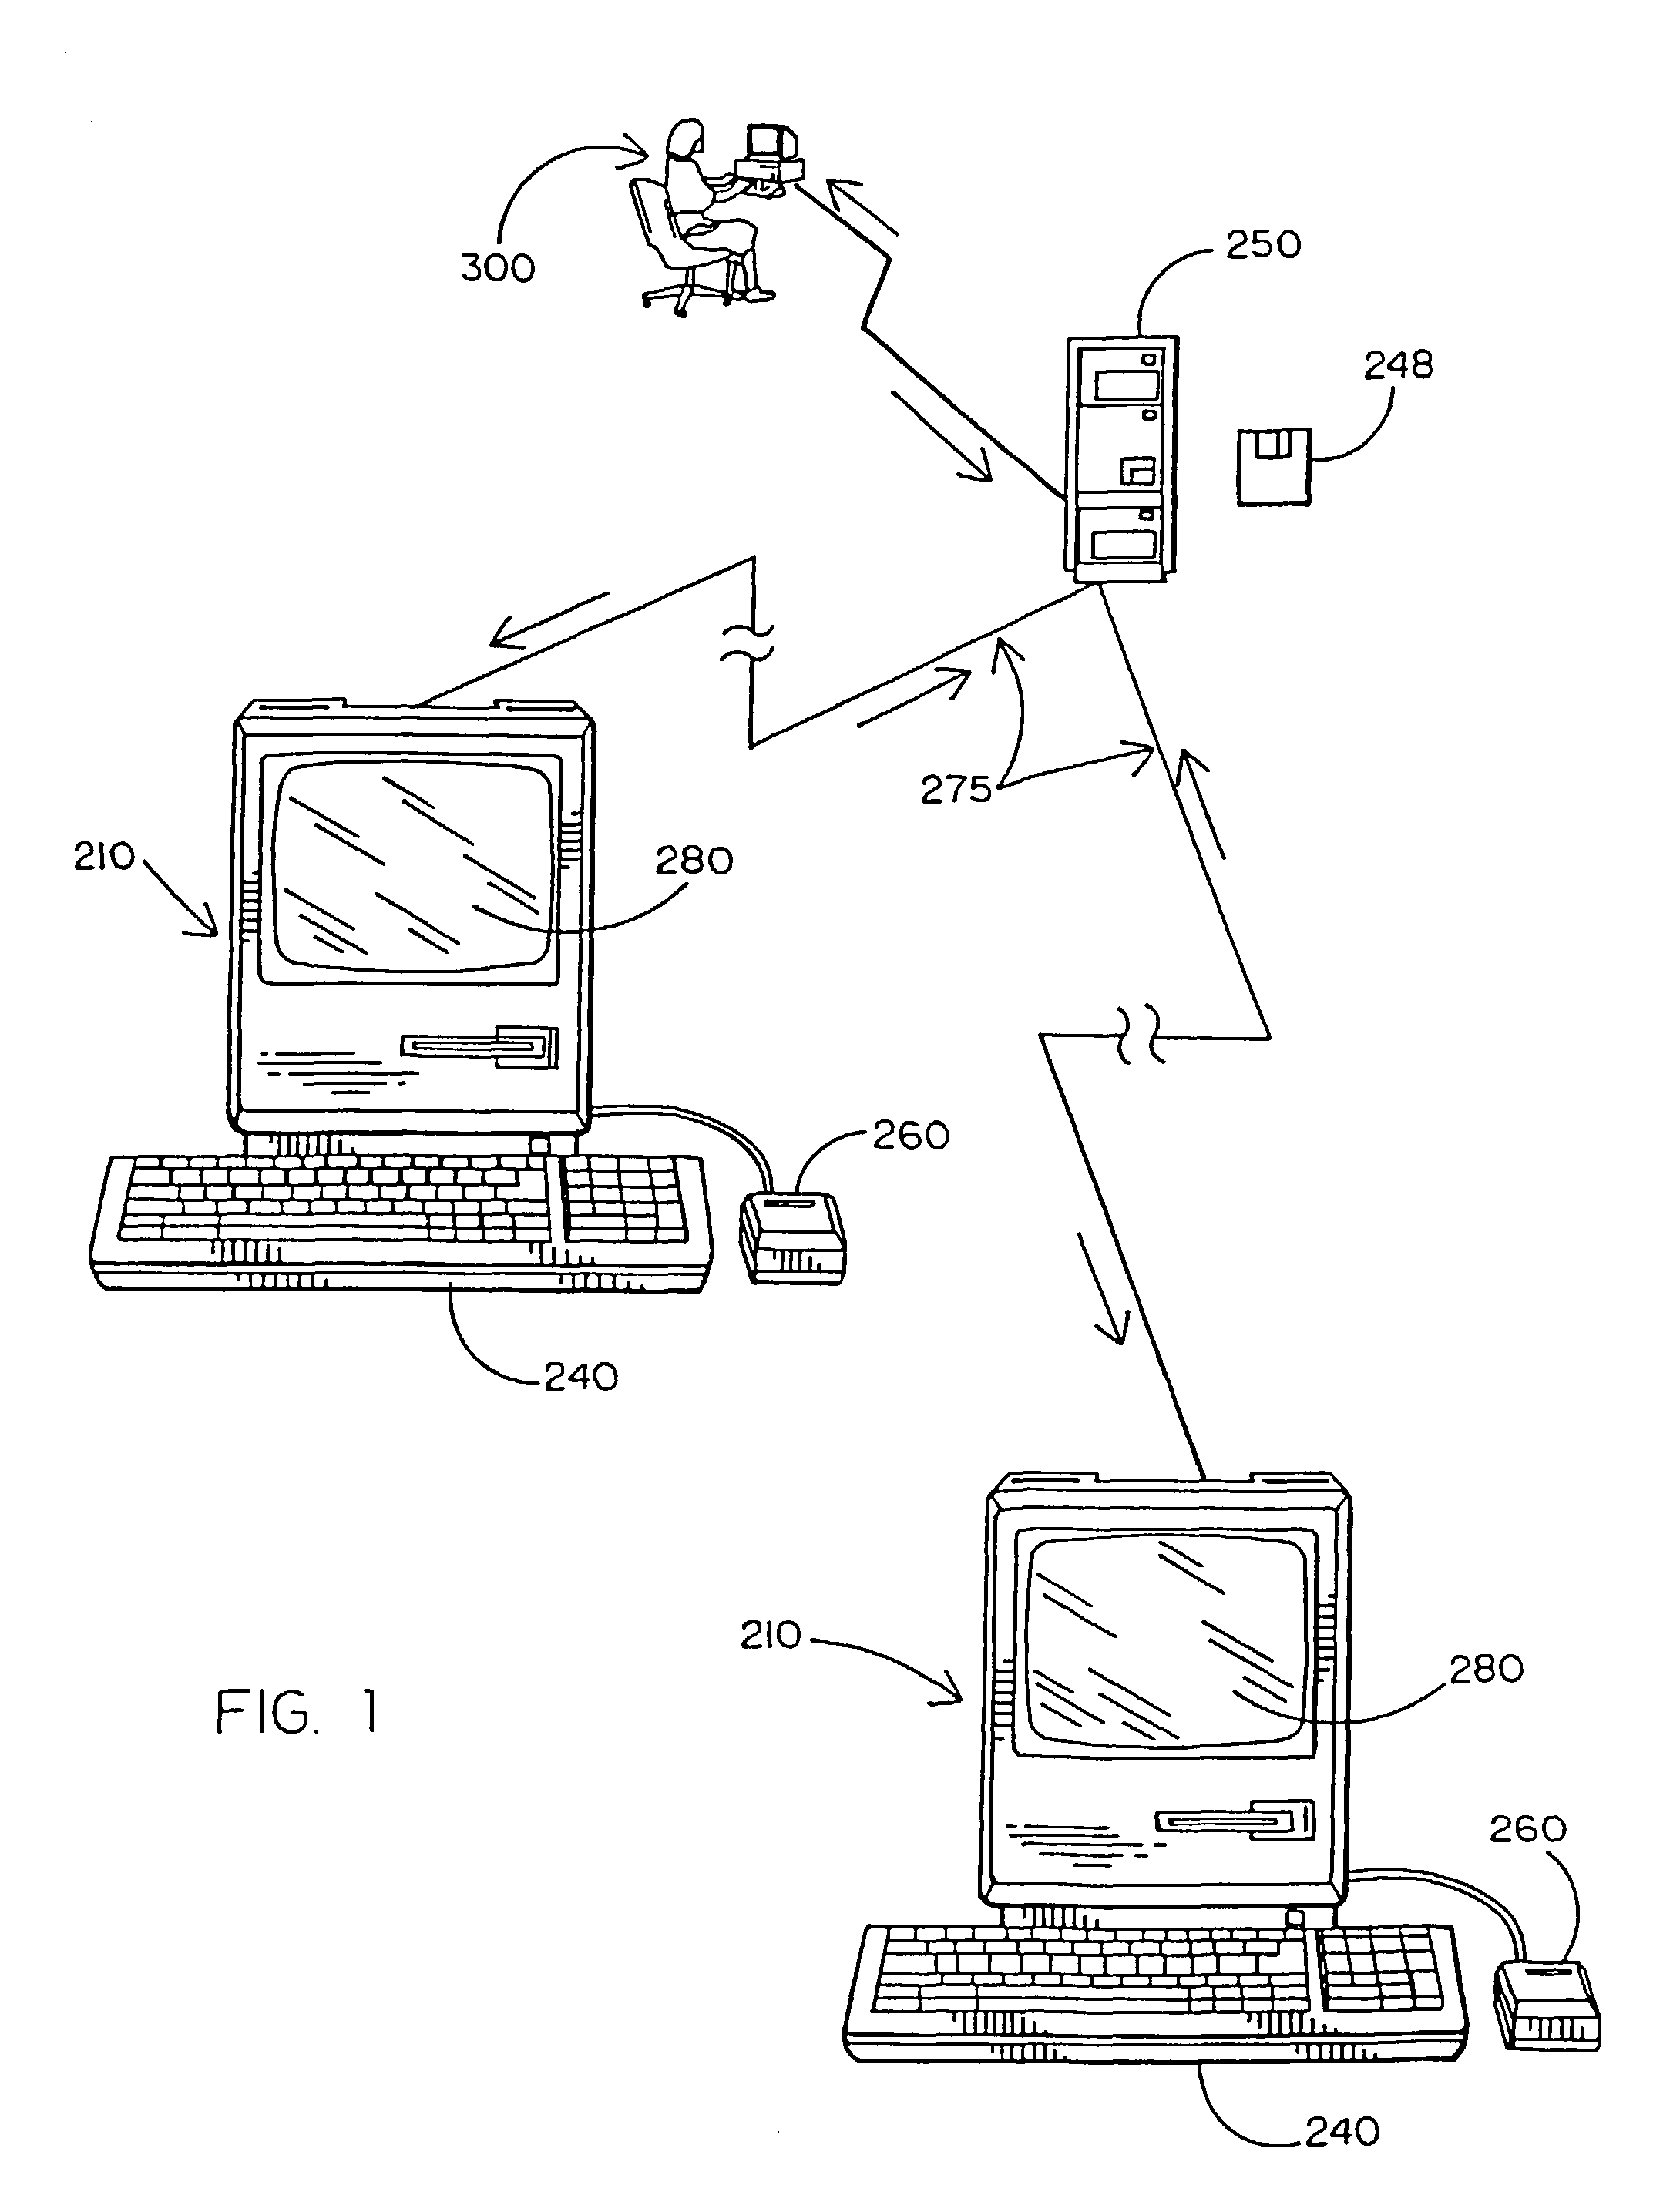 Method and system for providing simultaneous on-line auctions